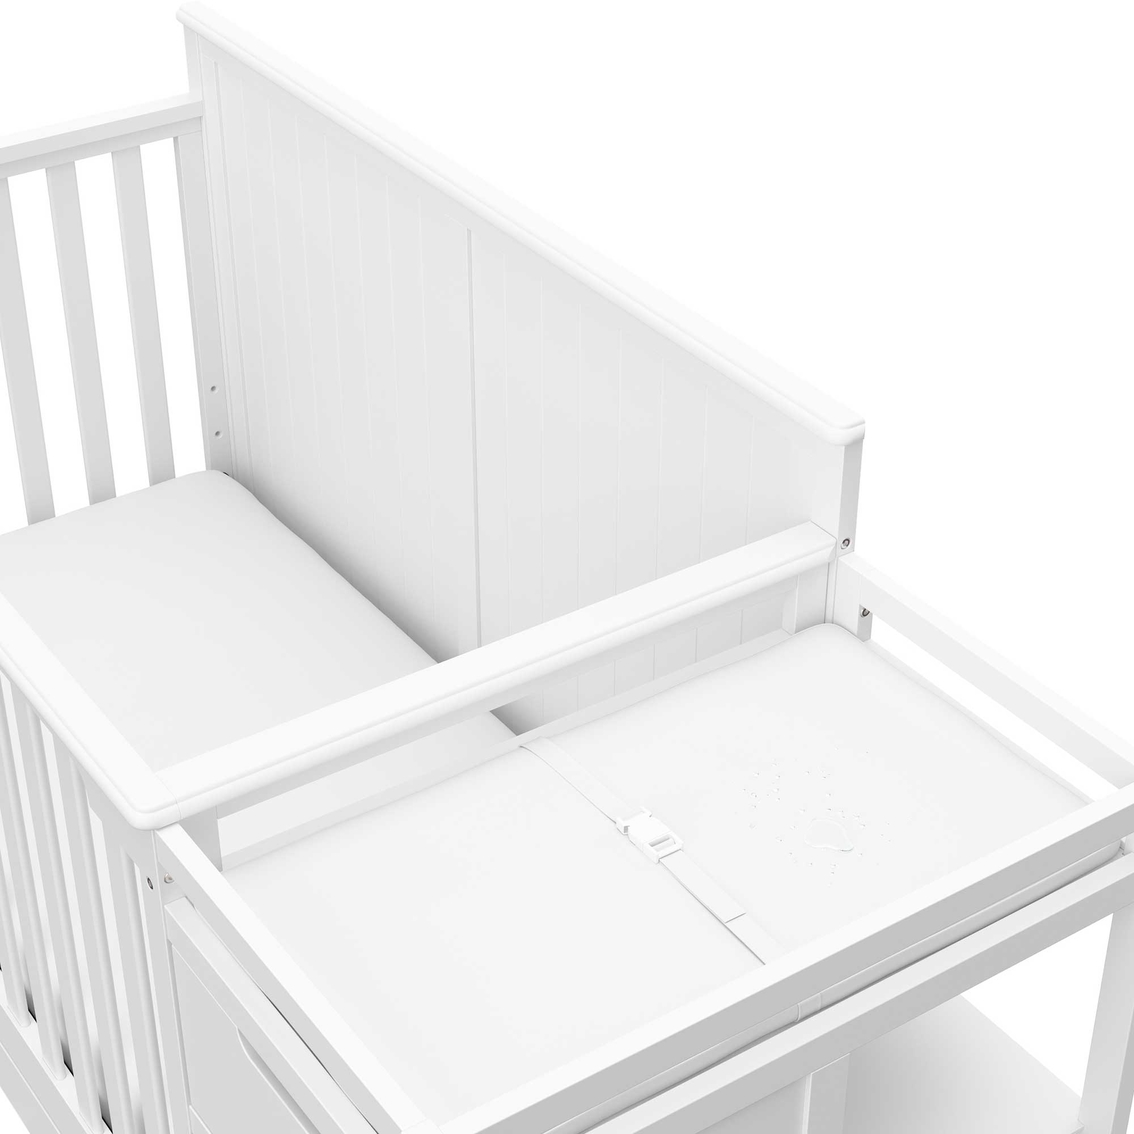 Graco Hadley Crib and Changer with Drawer - Image 8 of 10